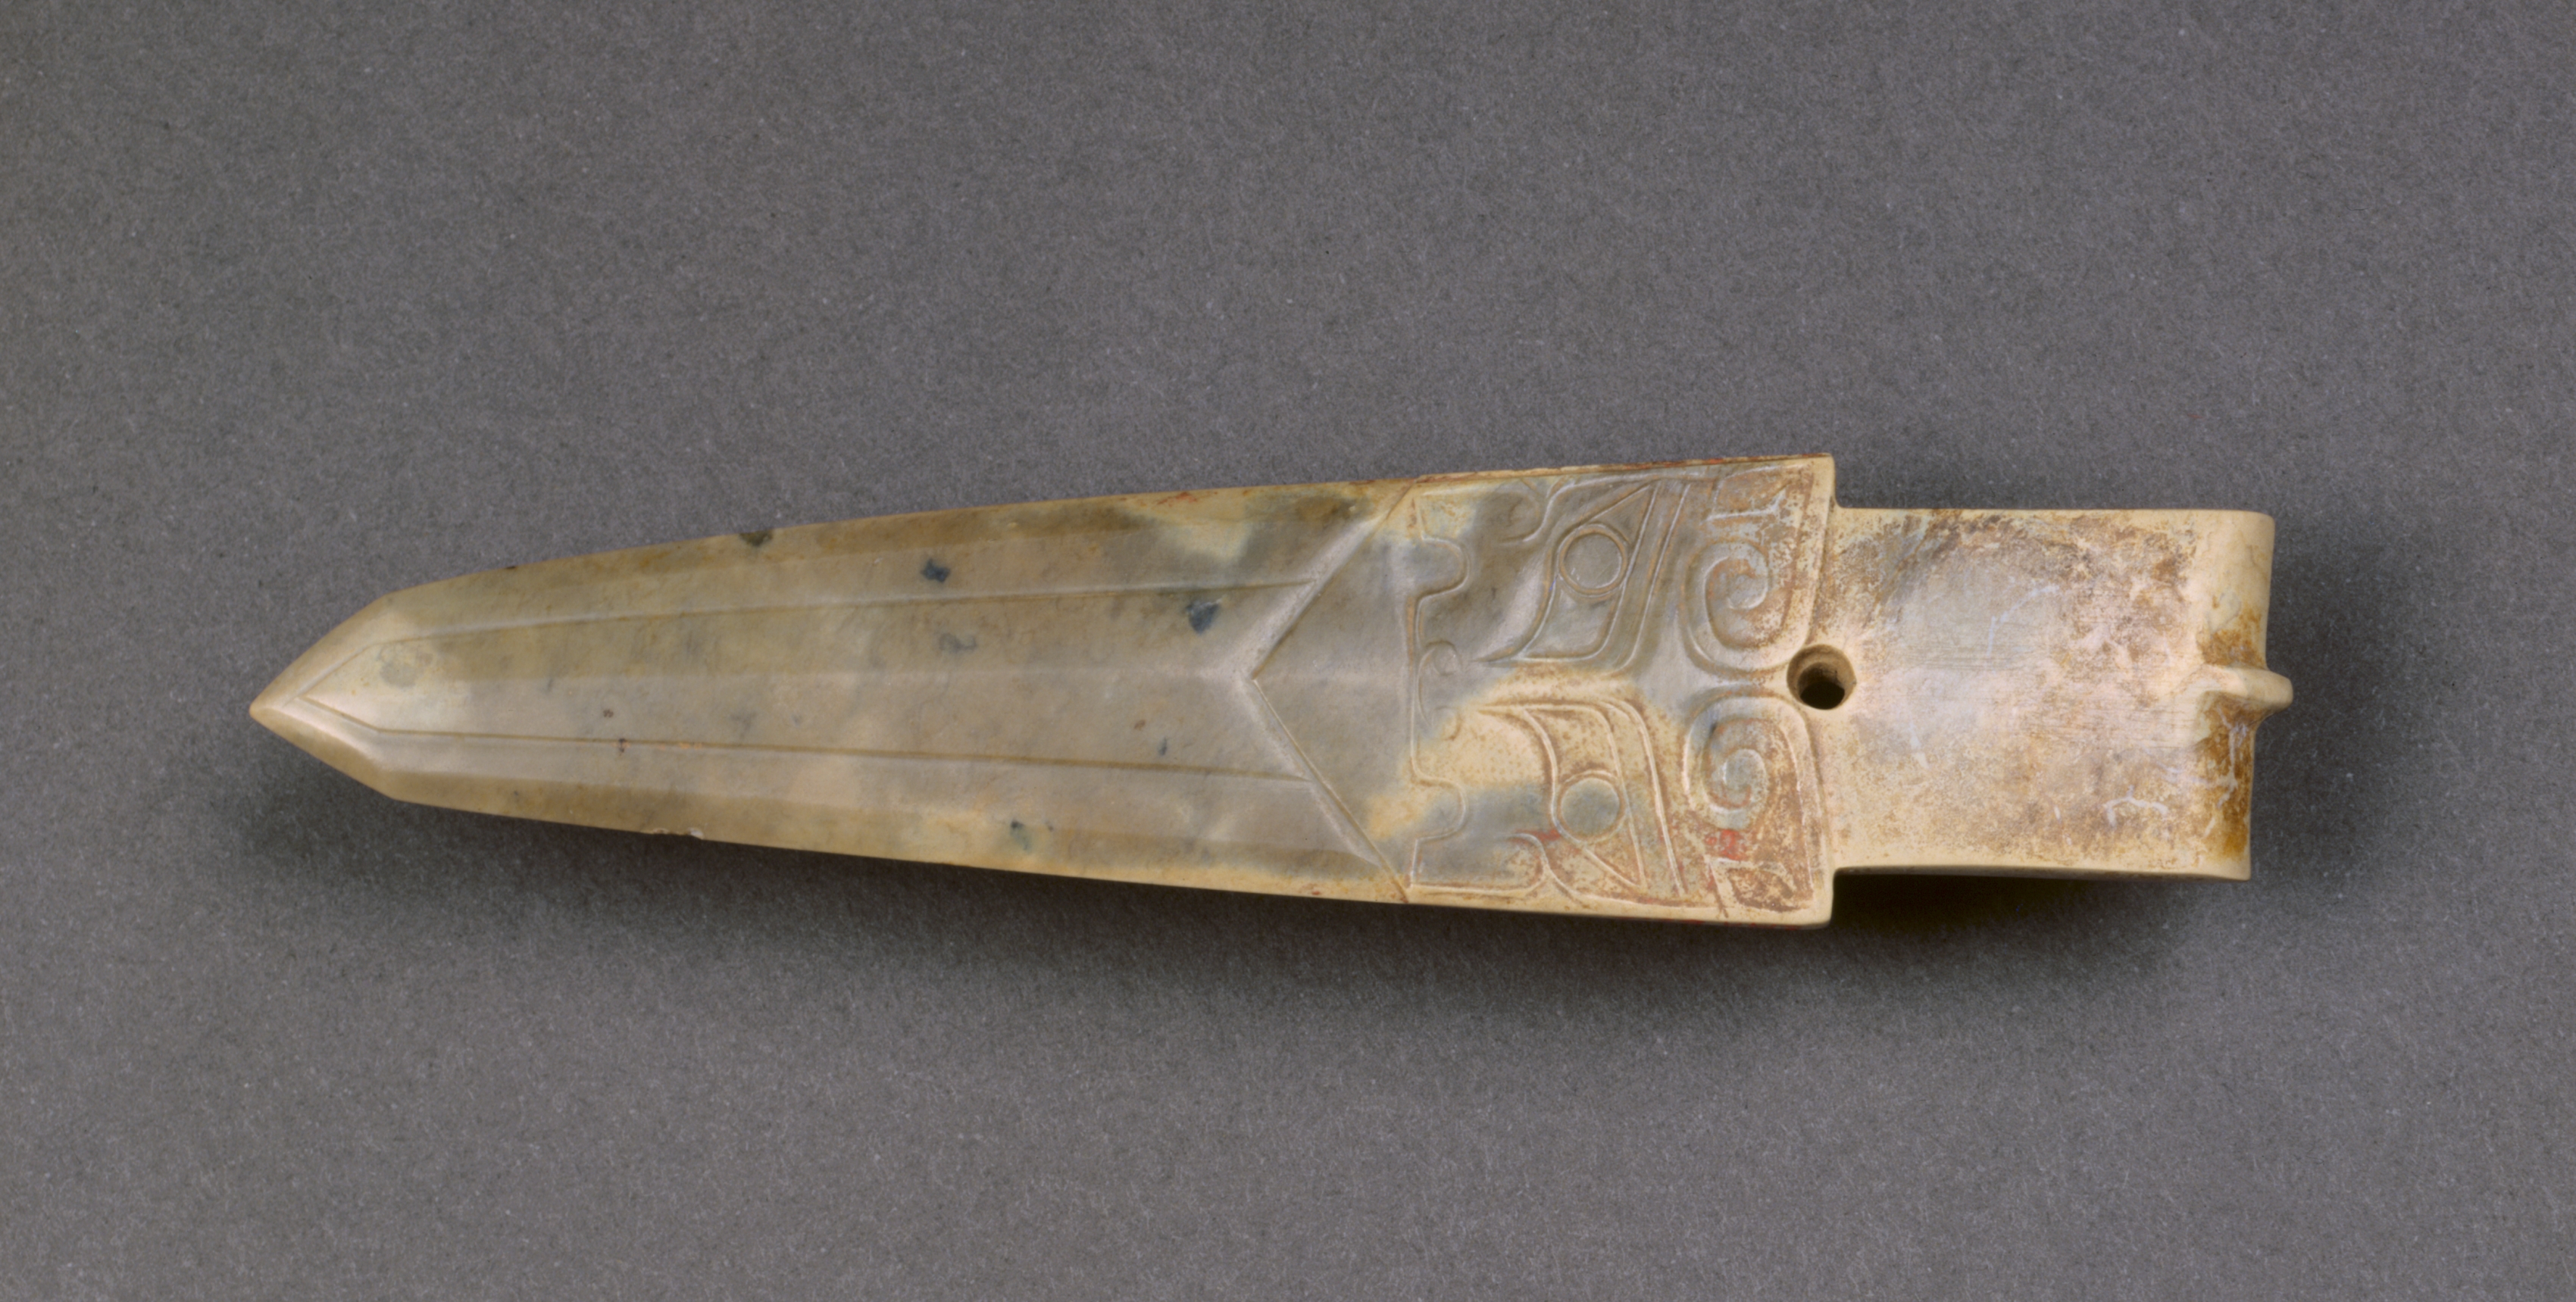 Ceremonial Dagger-Axe with Animal Masks (Ge)